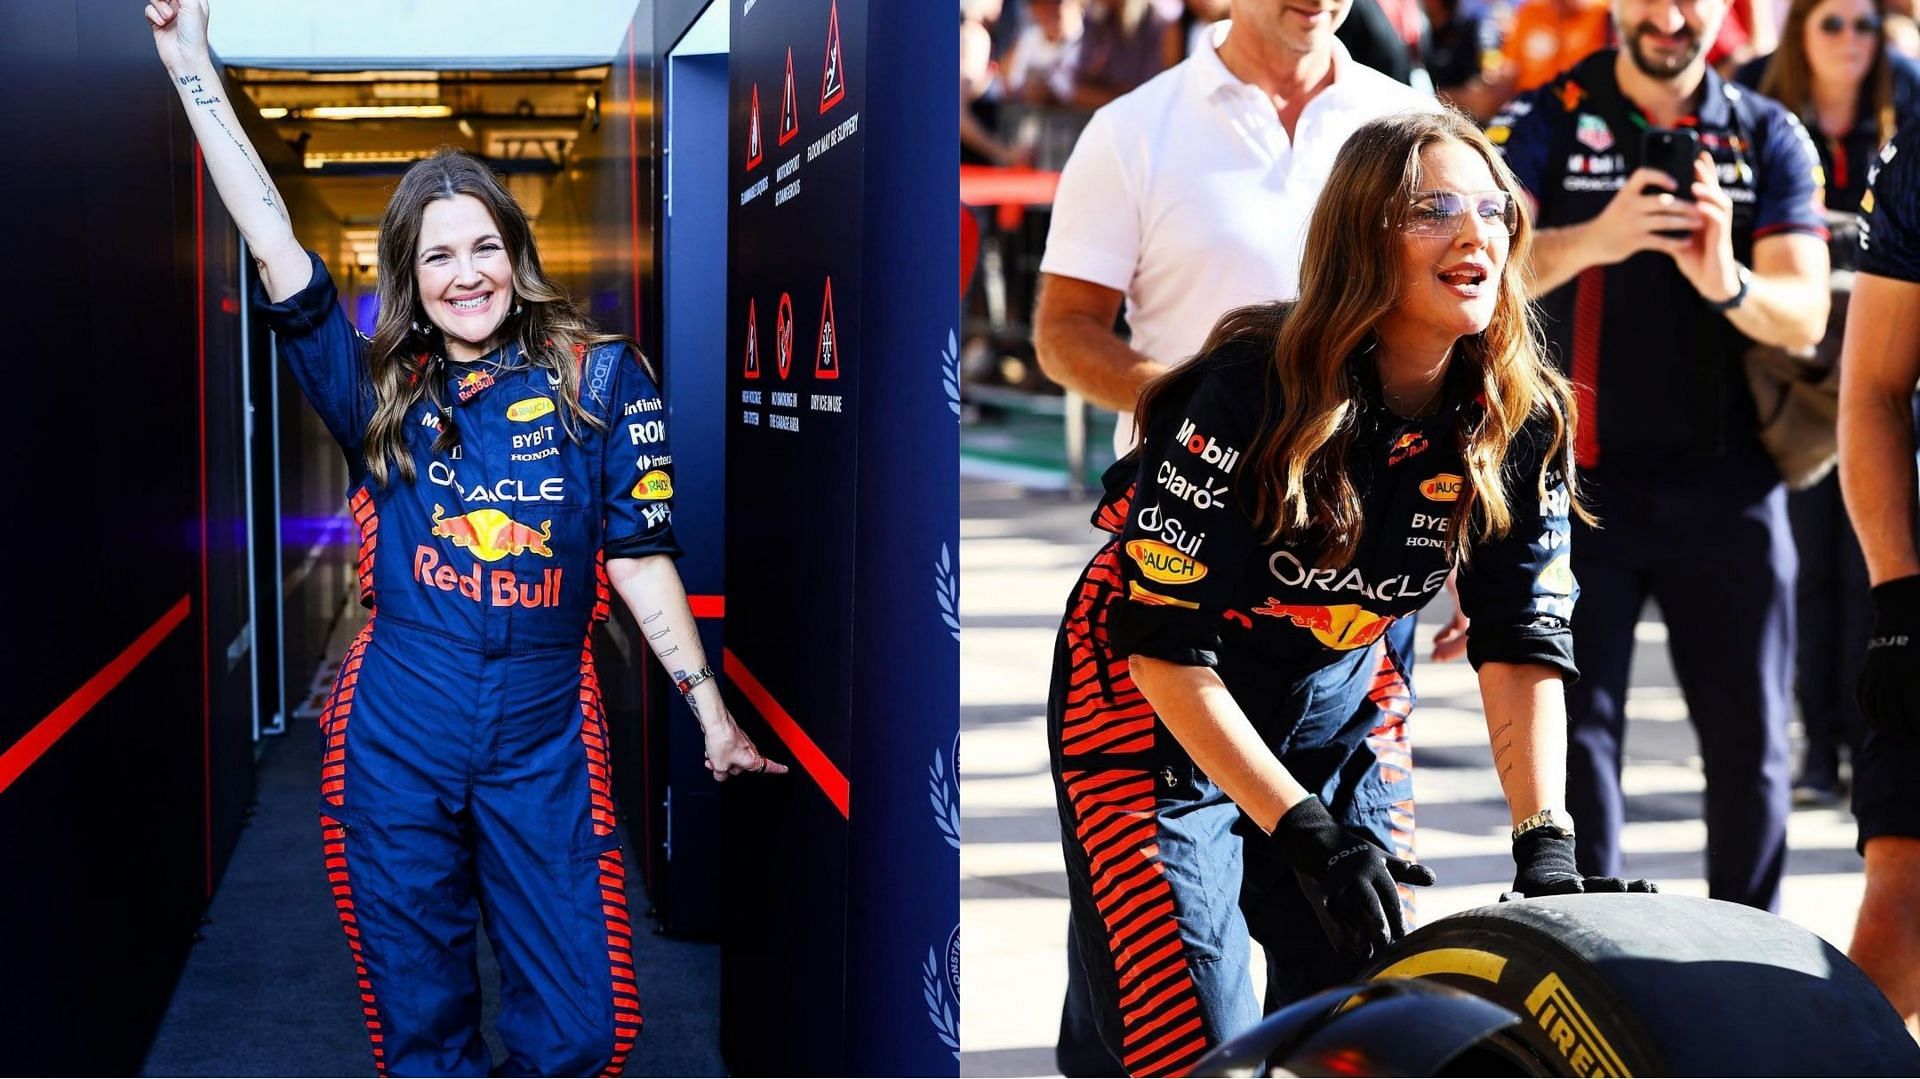 Drew Barrymore in the Red Bull paddocks performing a pit stop